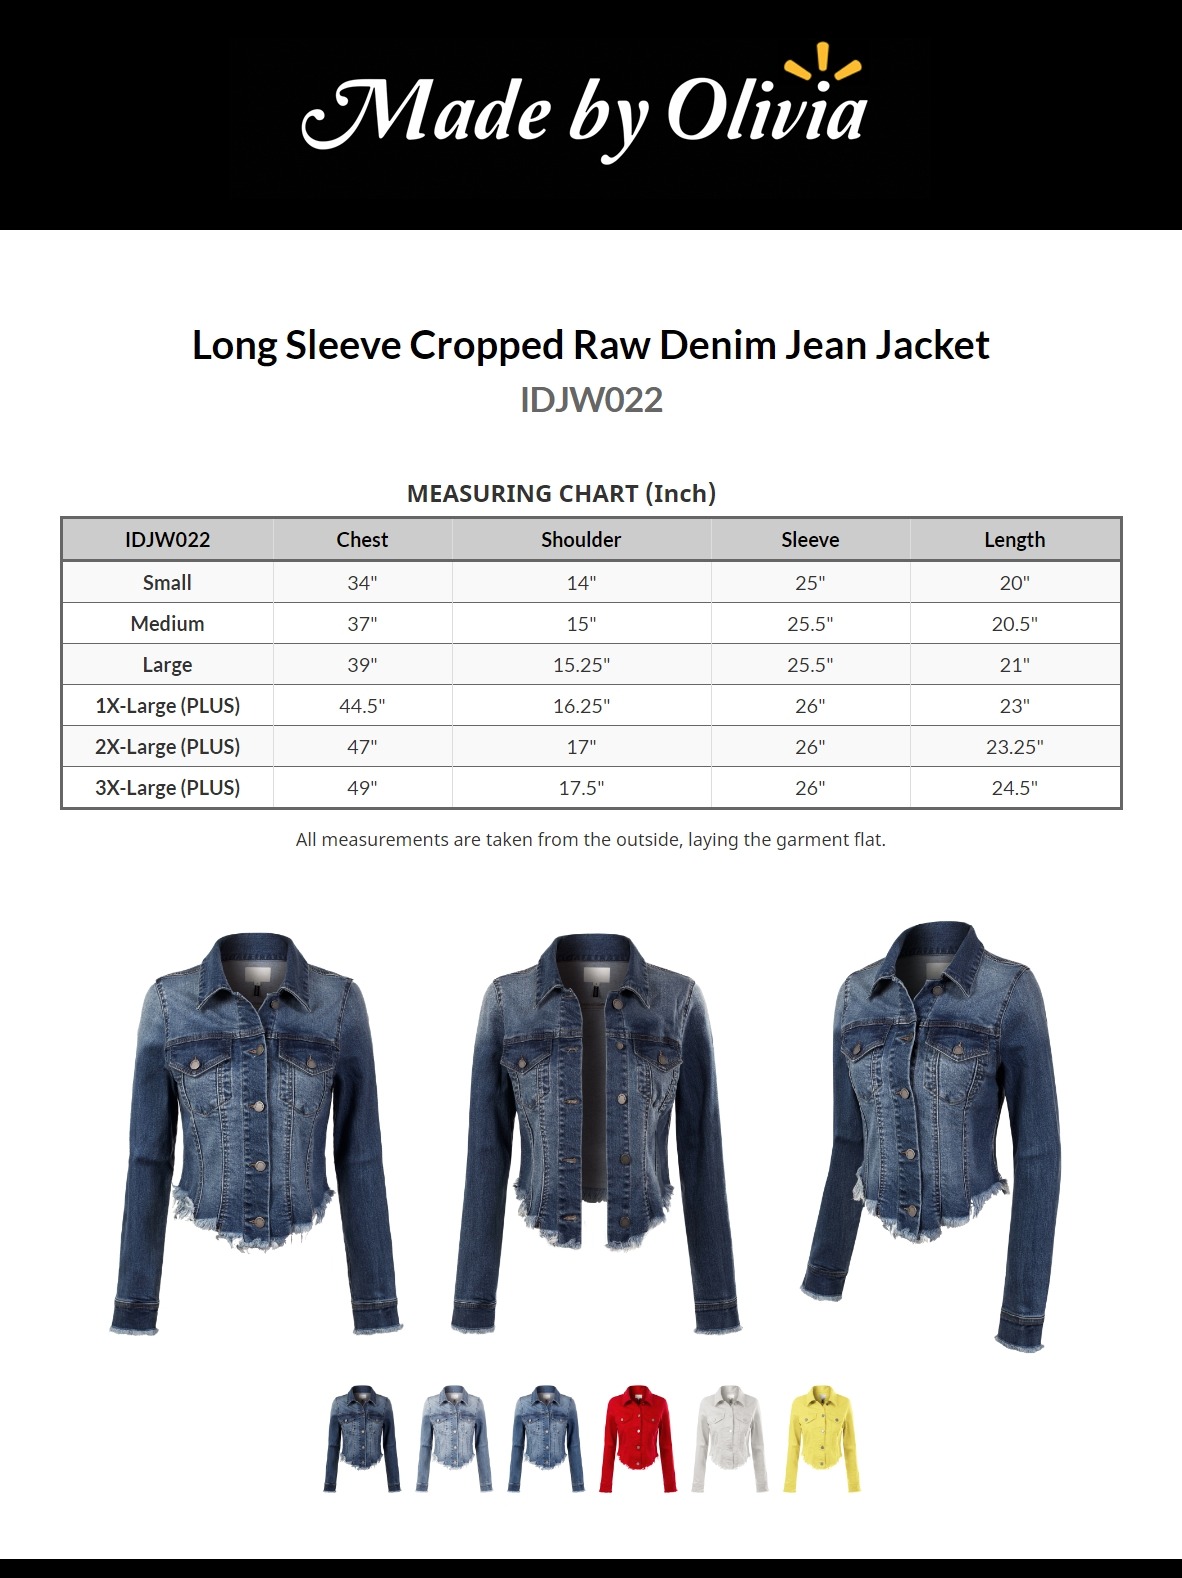 Made by Olivia Women's Long Sleeve Cropped Raw Denim Jean Jacket - image 2 of 6